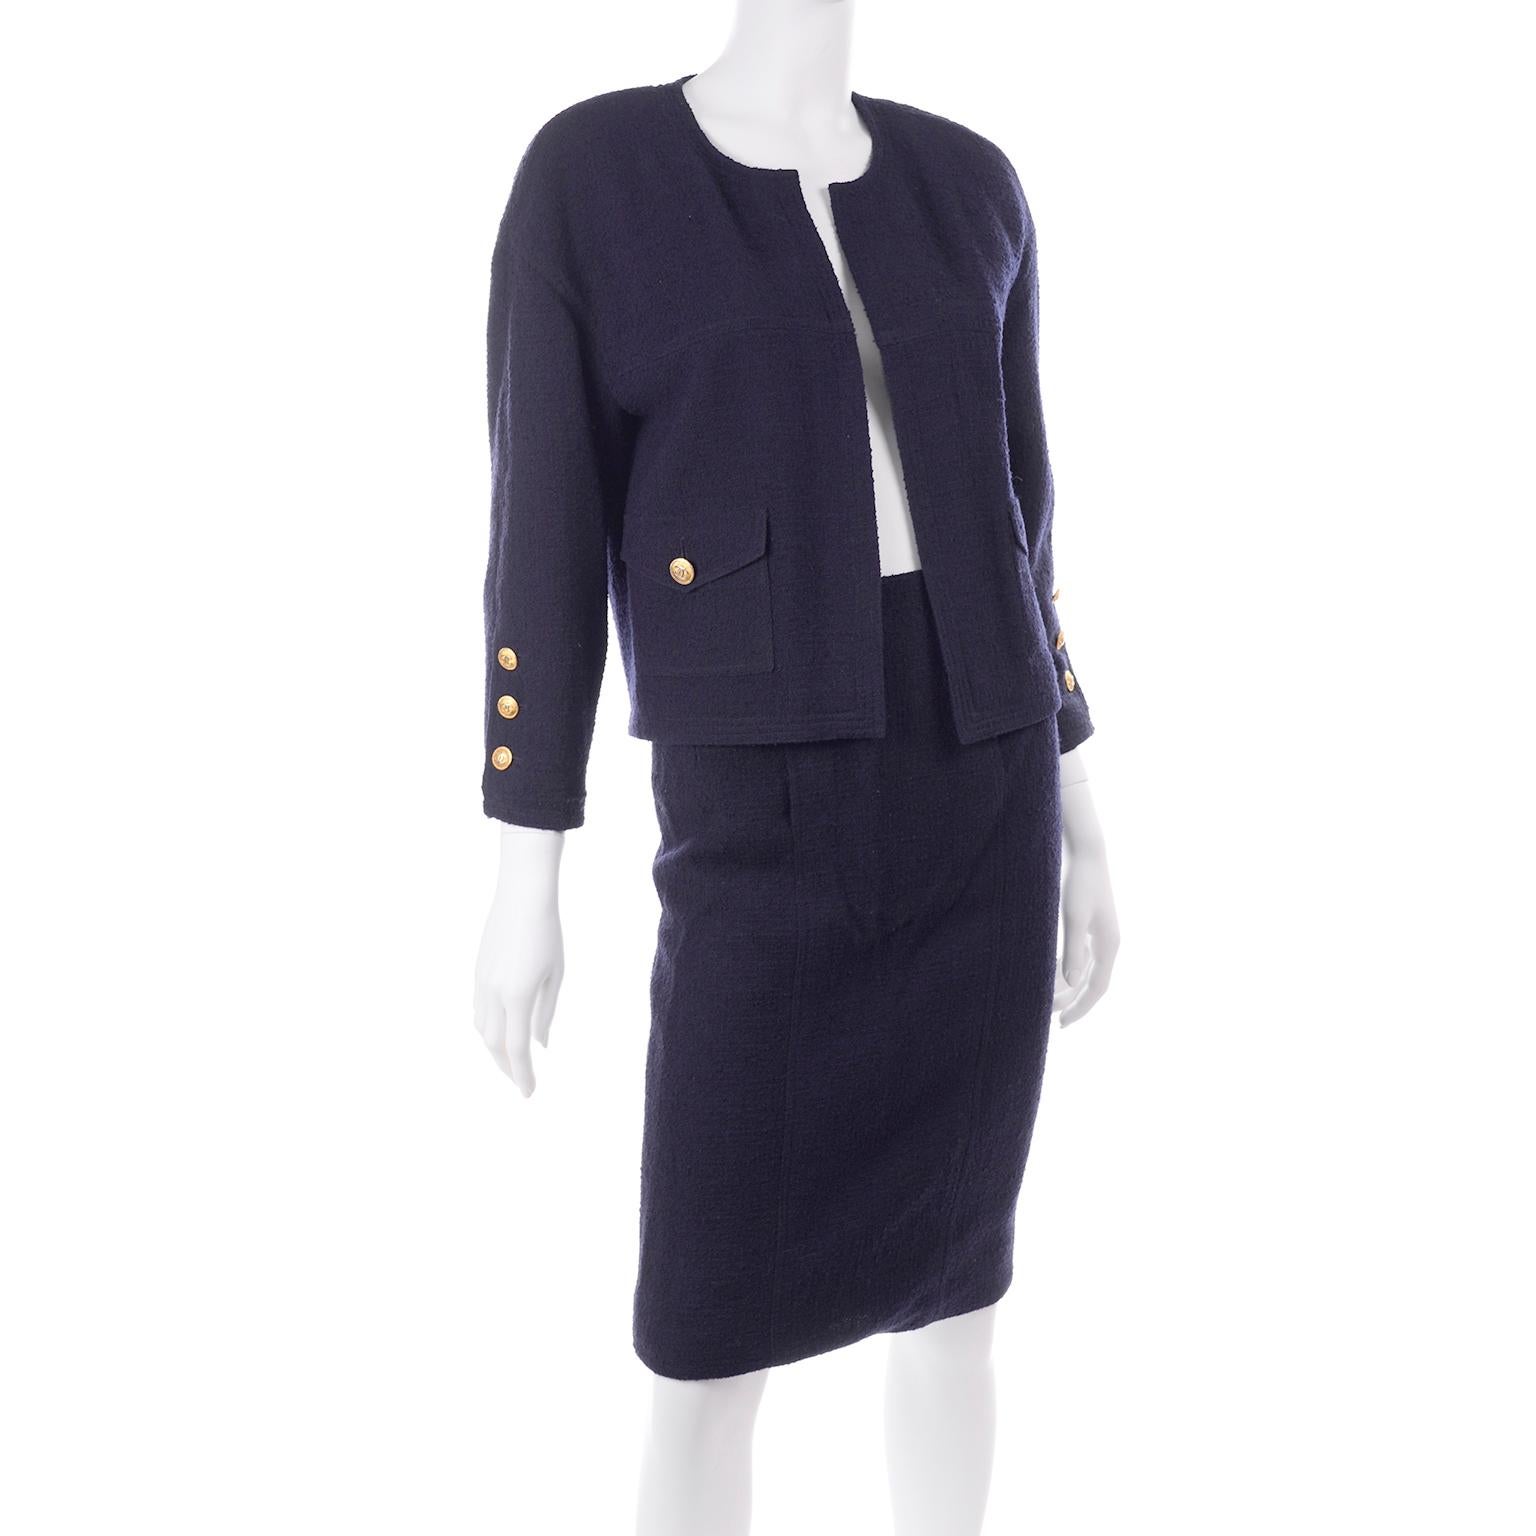 This classic vintage Chanel Boutique two piece suit has a slim fit skirt and a short boxy open front blazer or jacket . This suit is made with the quality you would expect from Chanel, with chain detail at the hem of the lining of the jacket, silk